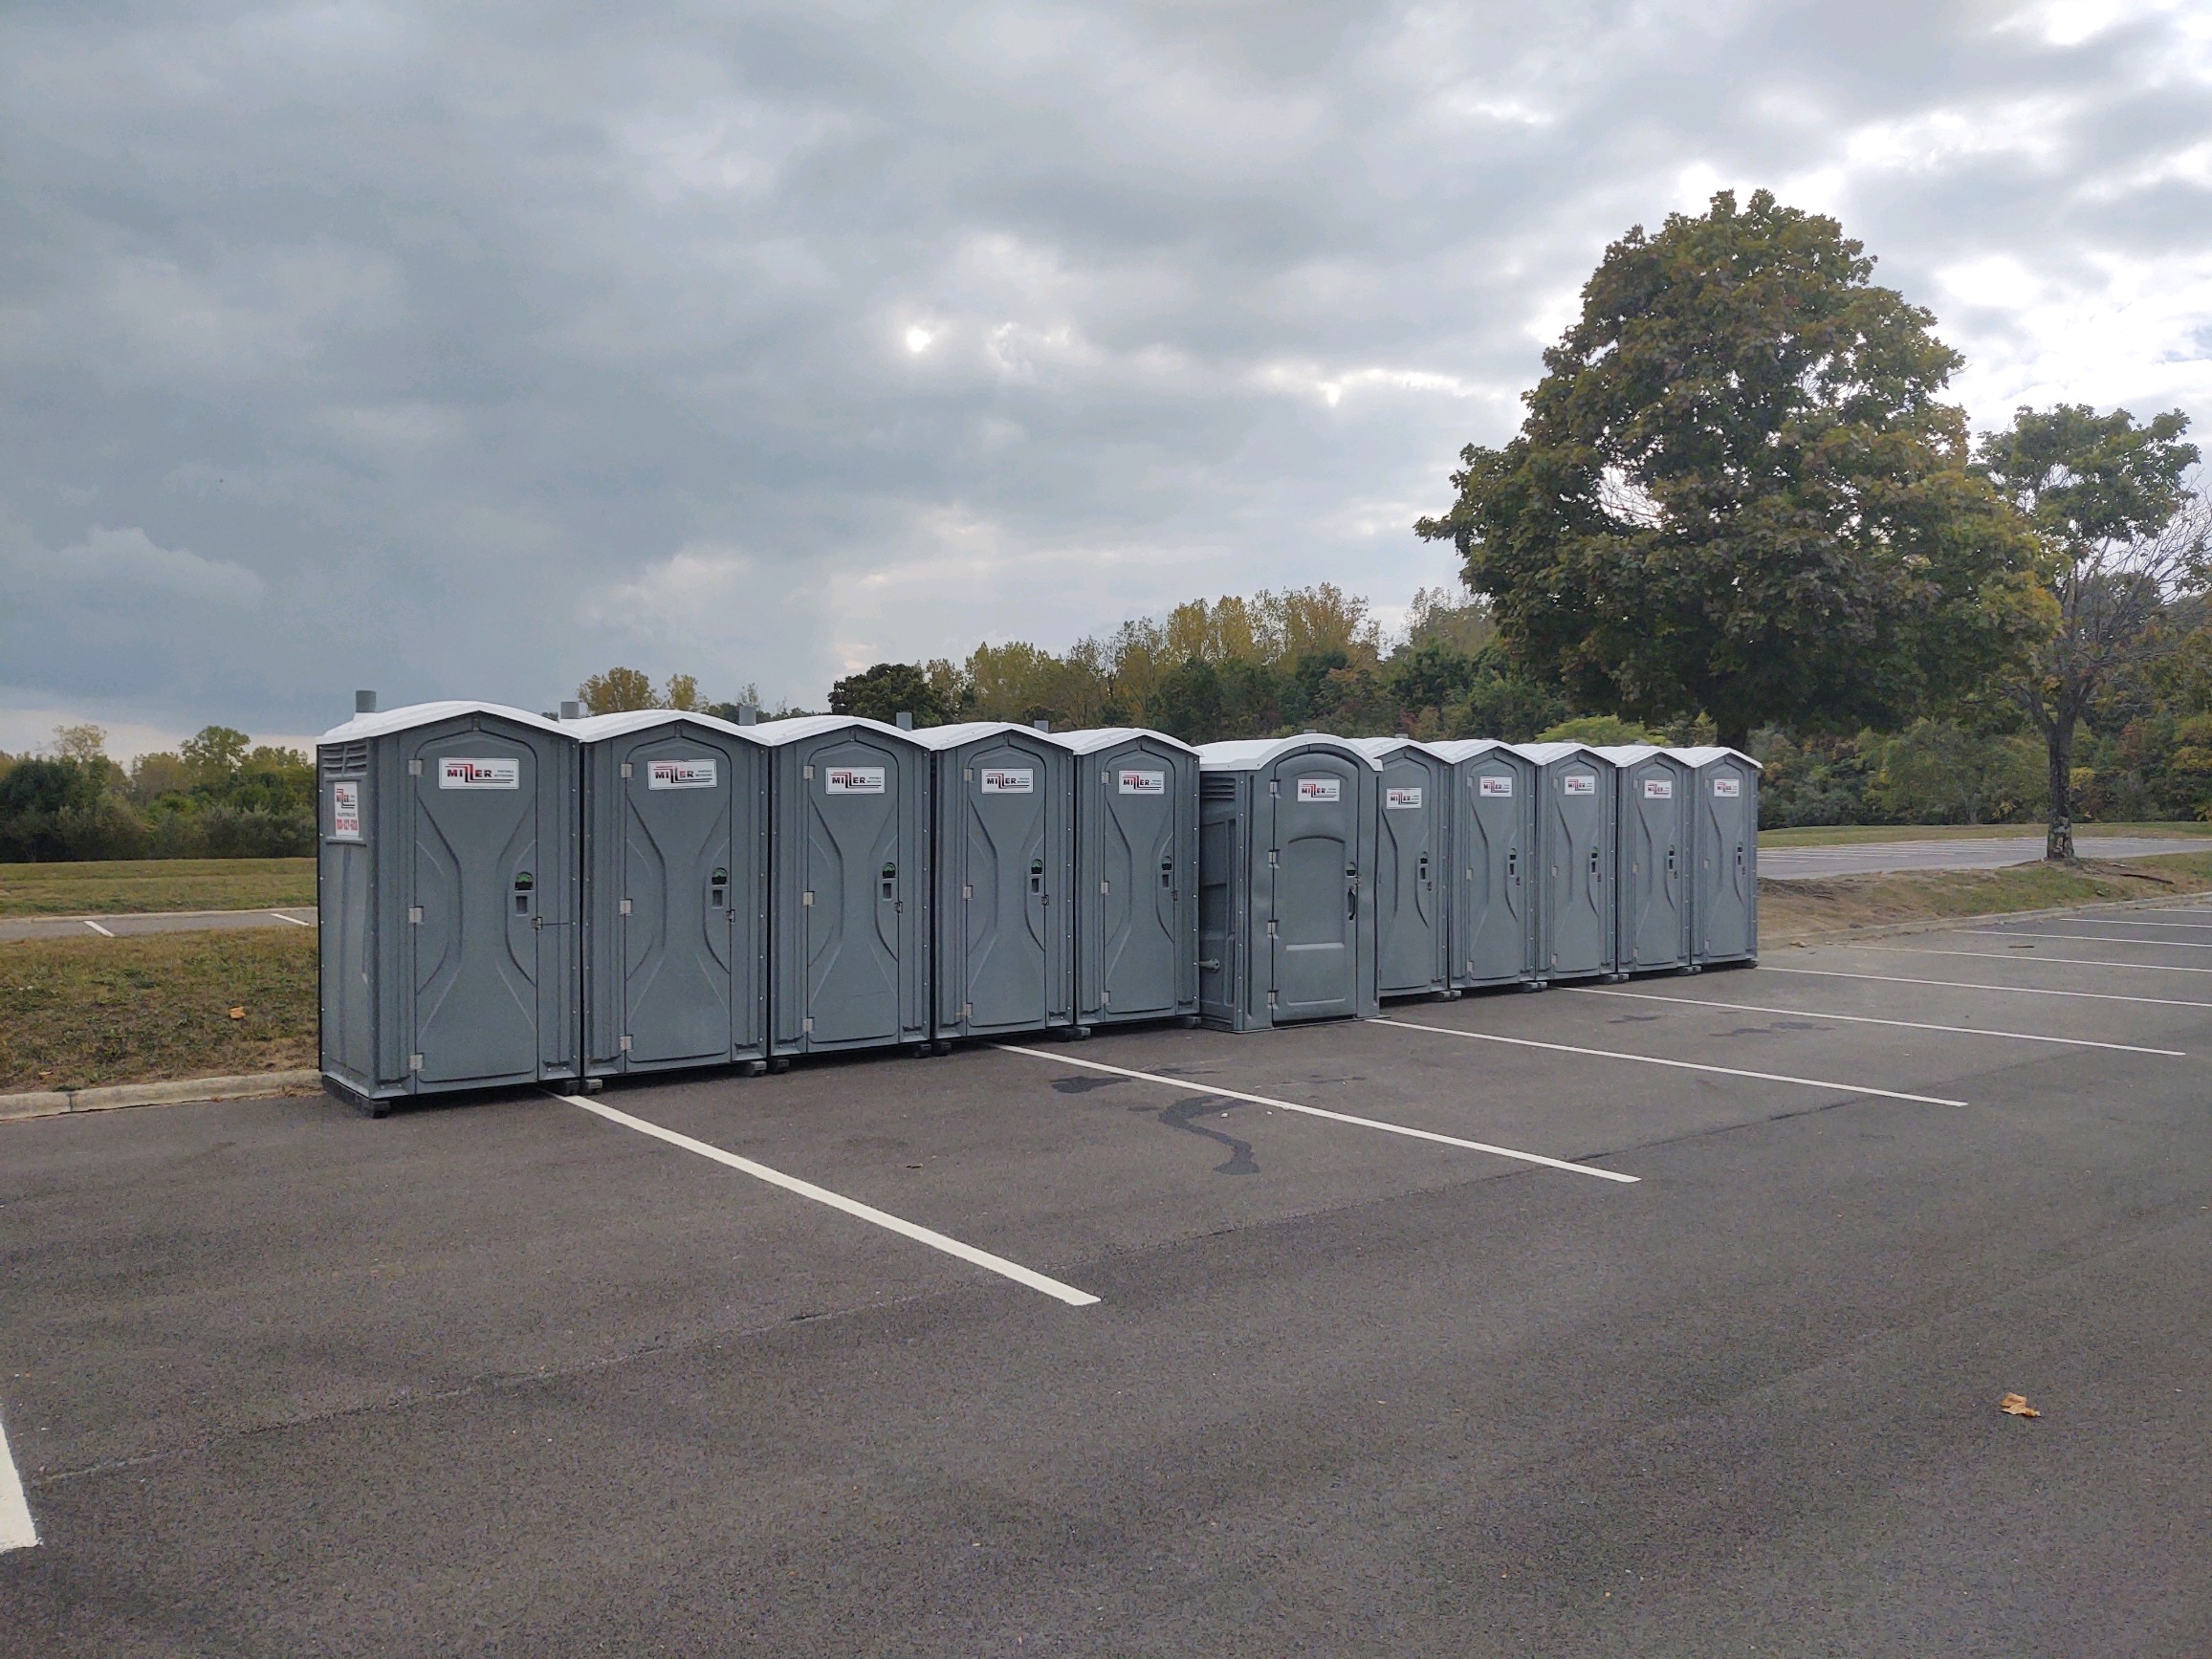 Portable toilets lined up in parking lot.